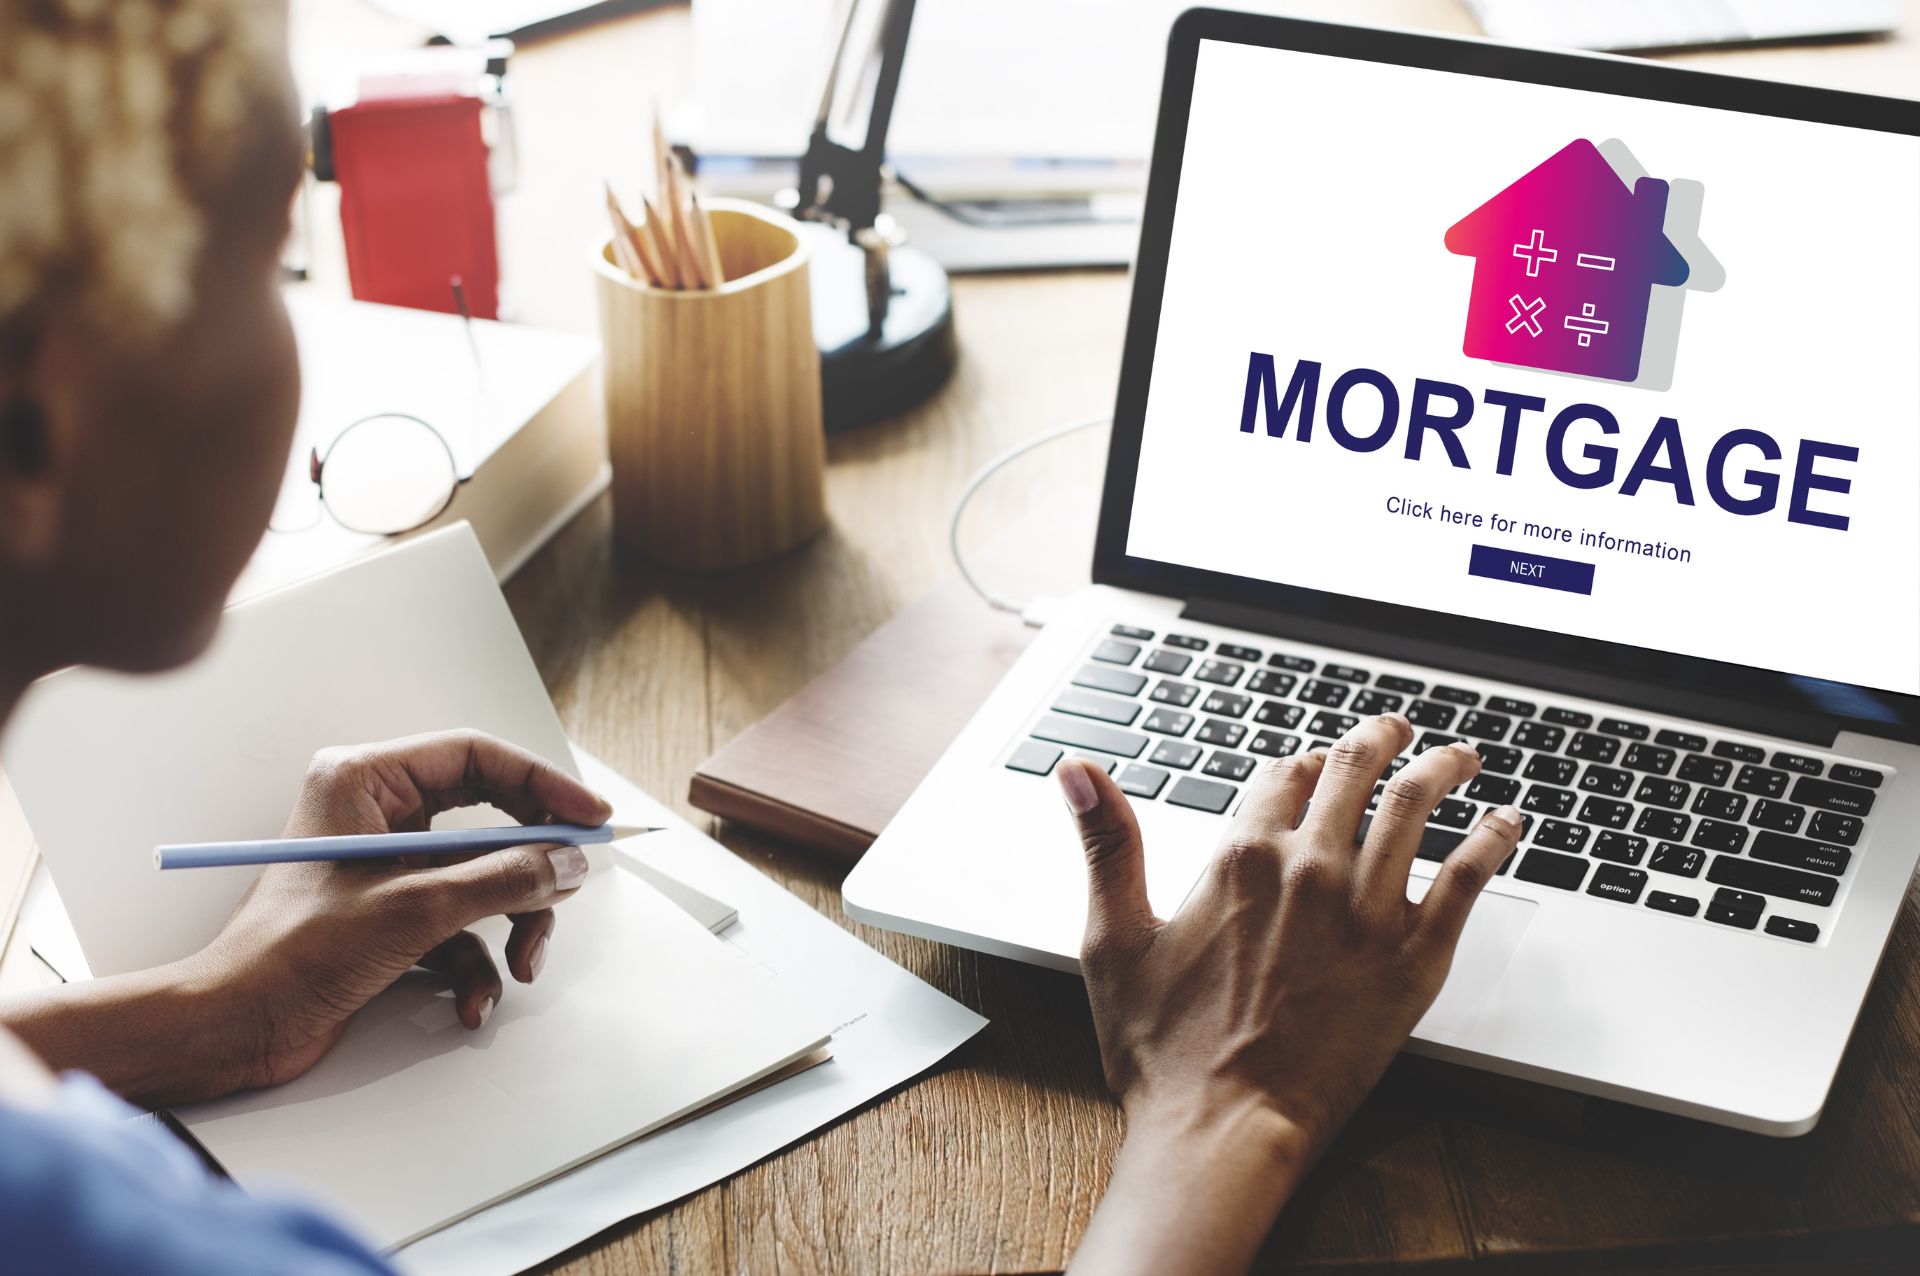 Using a laptop to look for a new mortgage deal